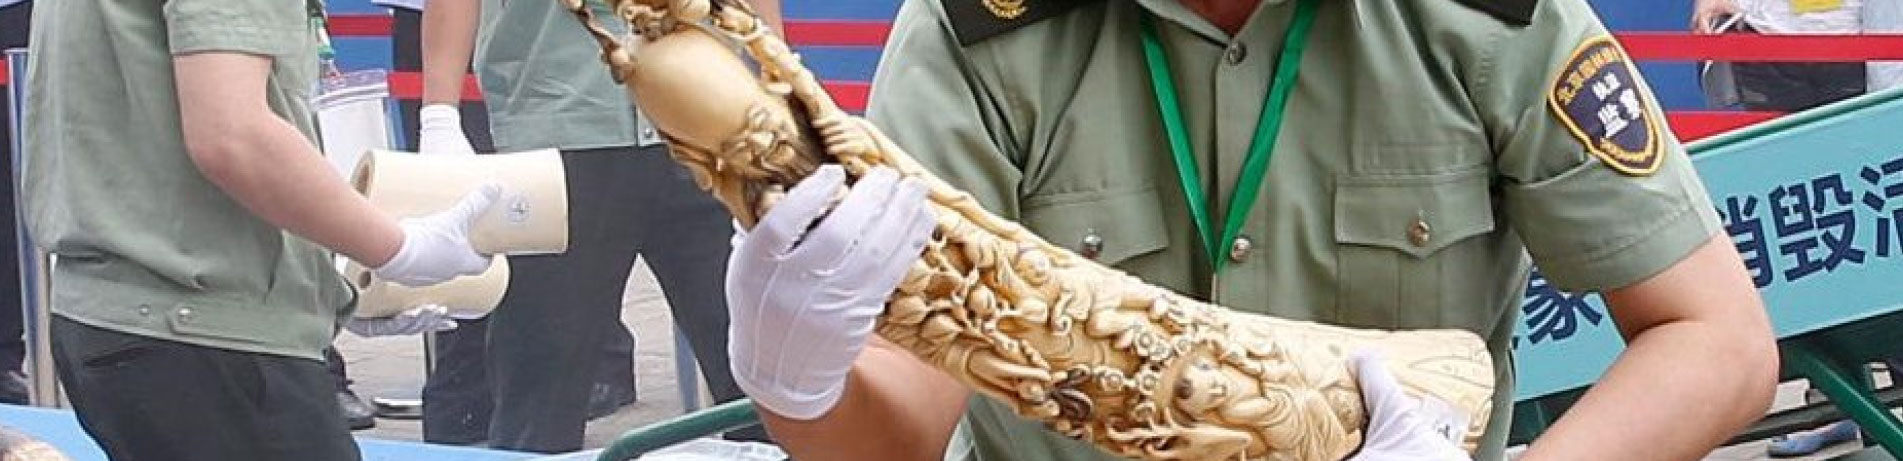 Chinese officials handle seized ivory carvings